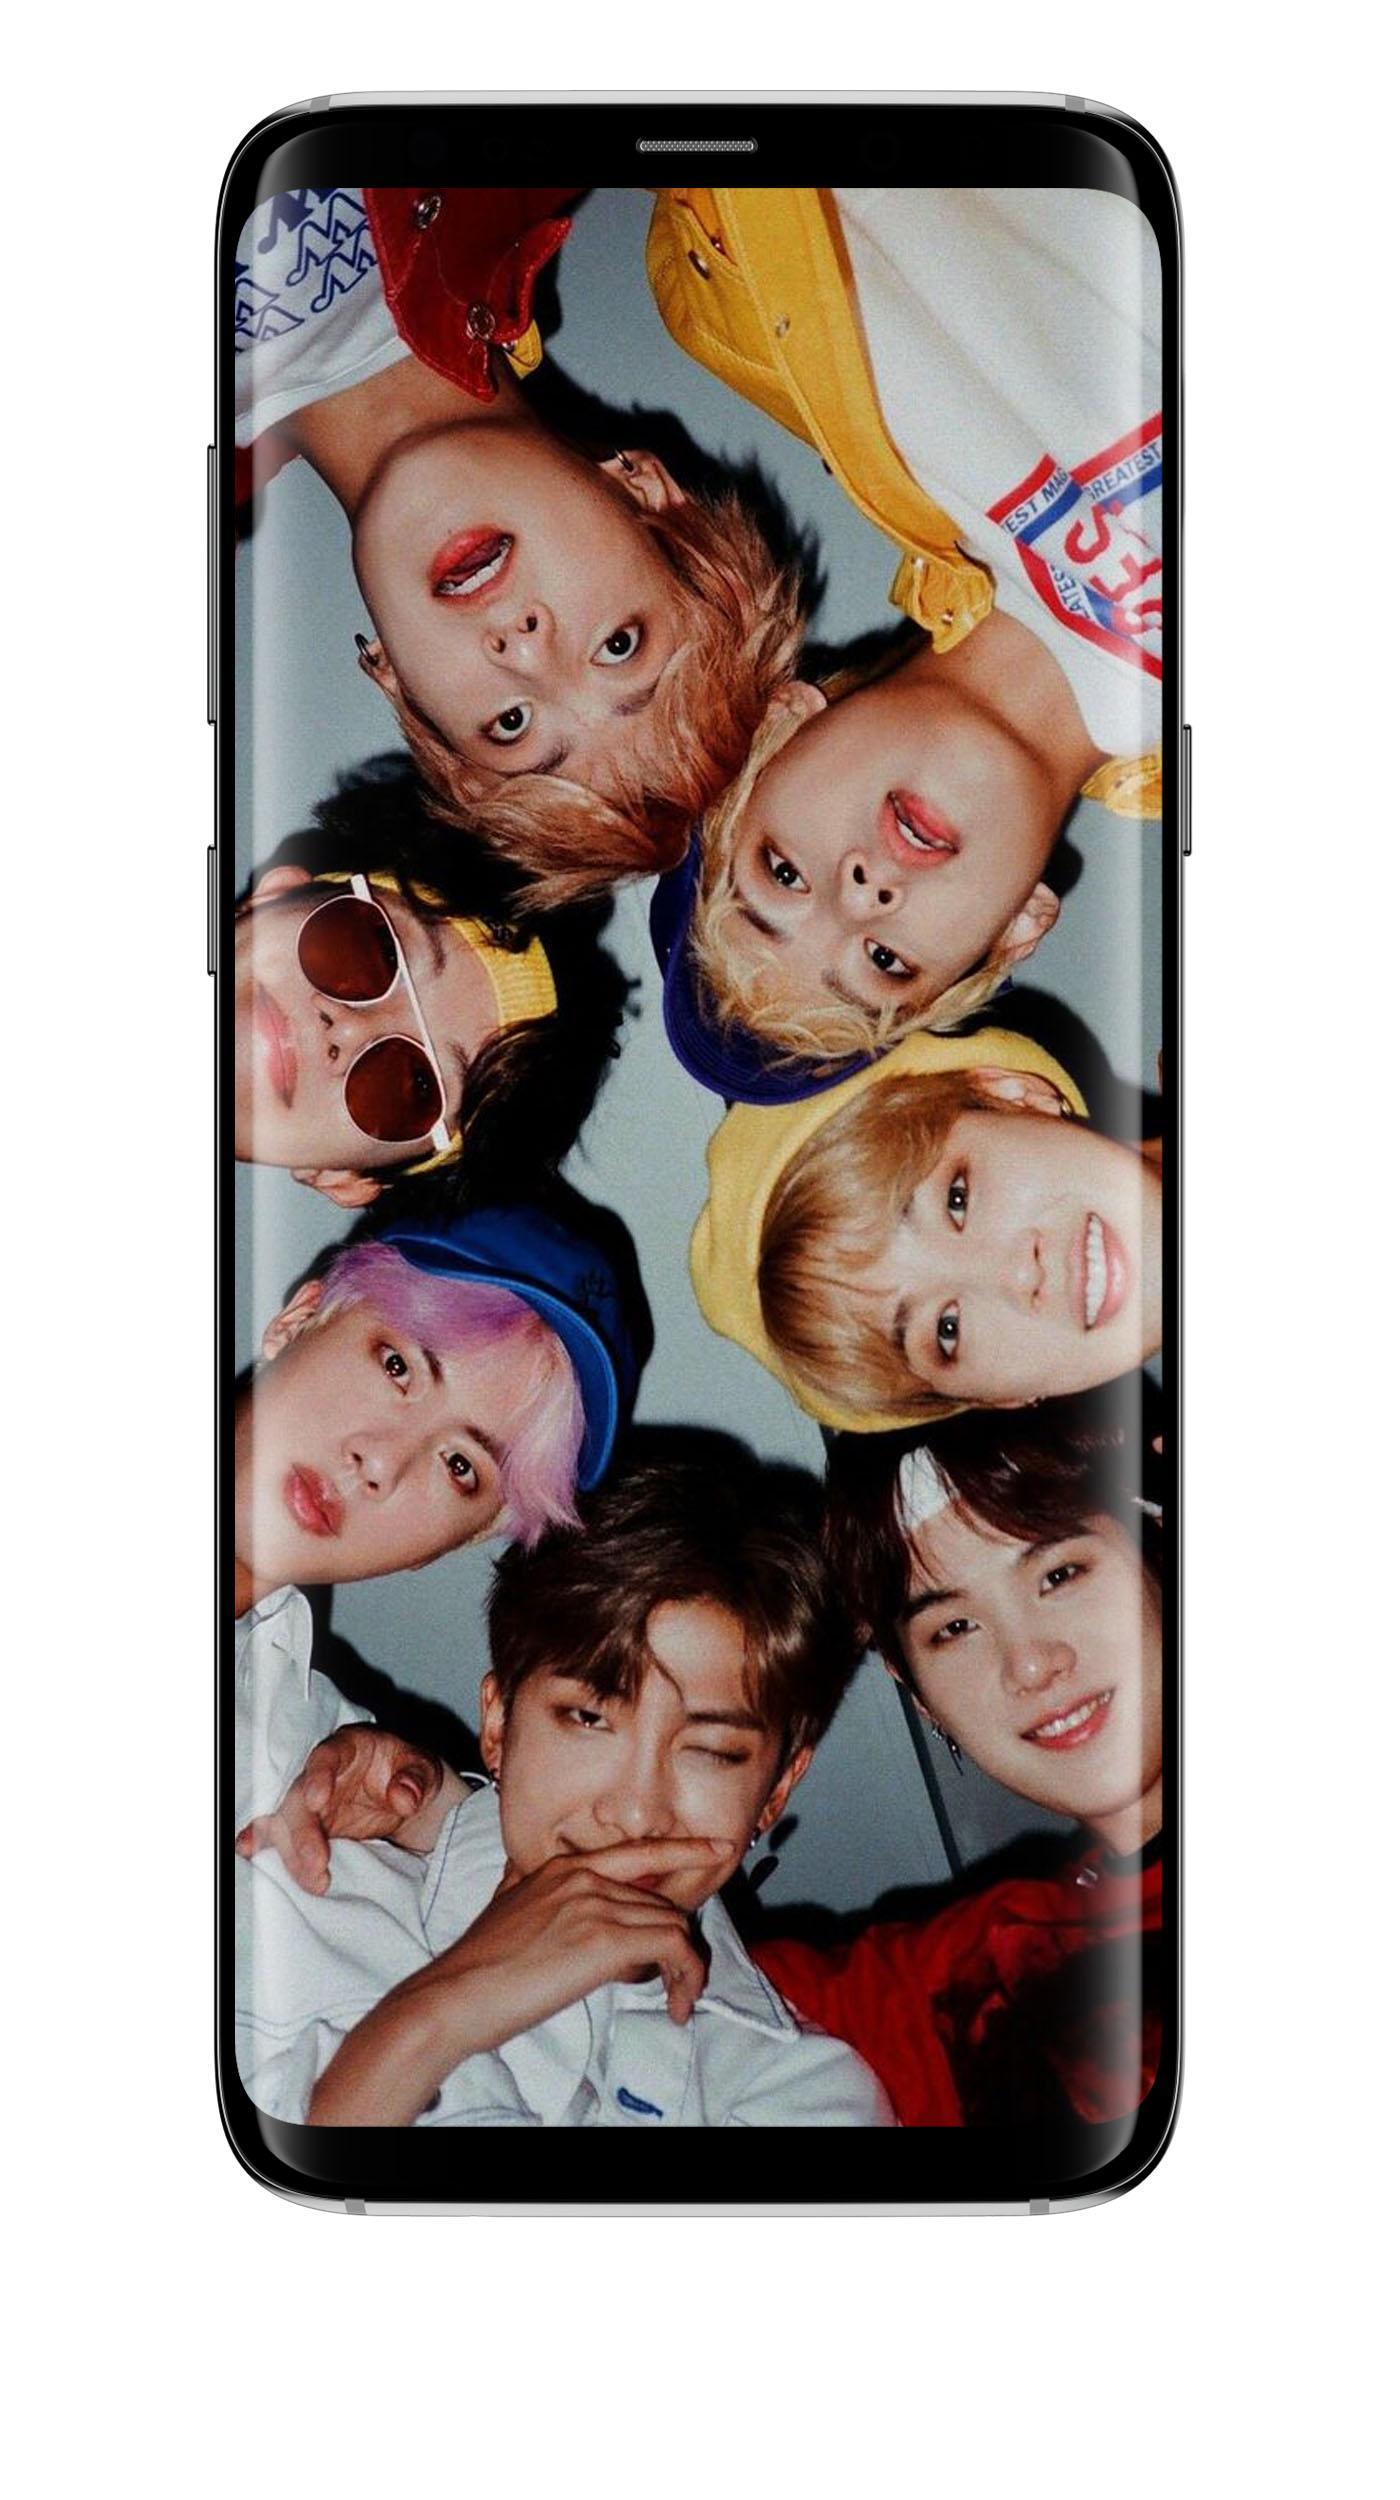 KPOP BTS Wallpaper HD 2020 for Android - APK Download